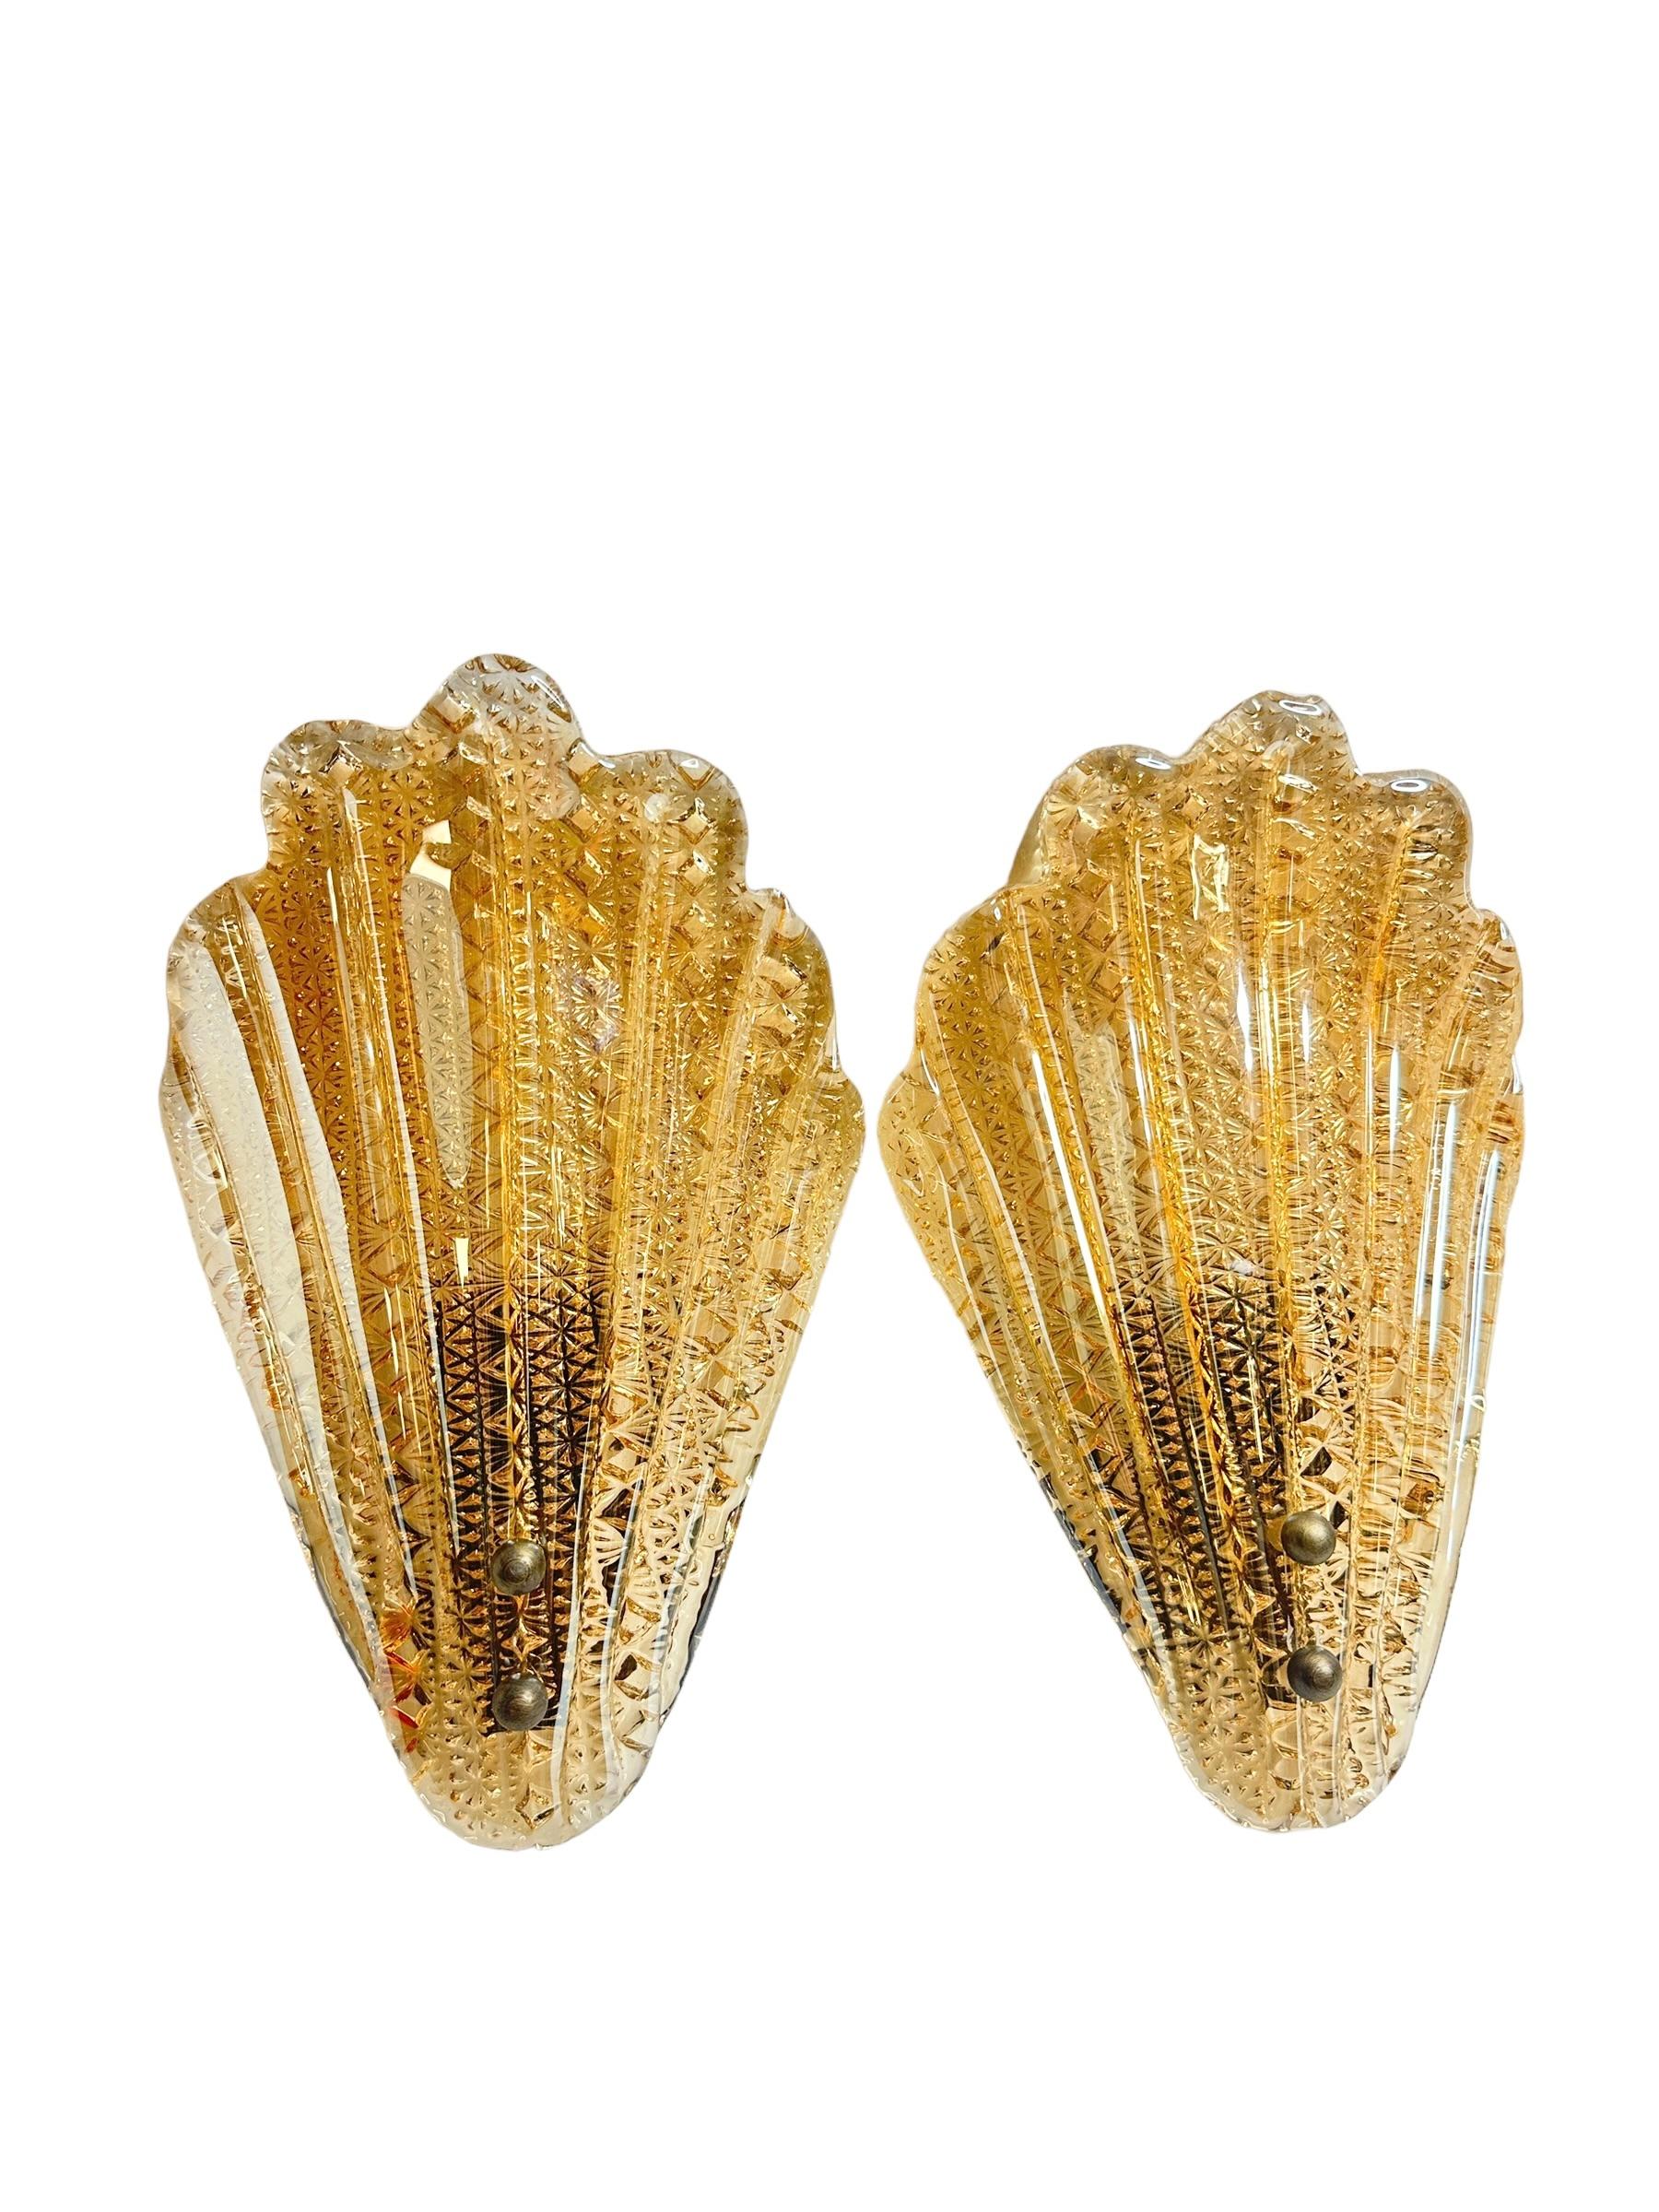 Italian Stunning Set of Three Murano Glass Leaf Sconces by Barovier and Toso, Italy For Sale